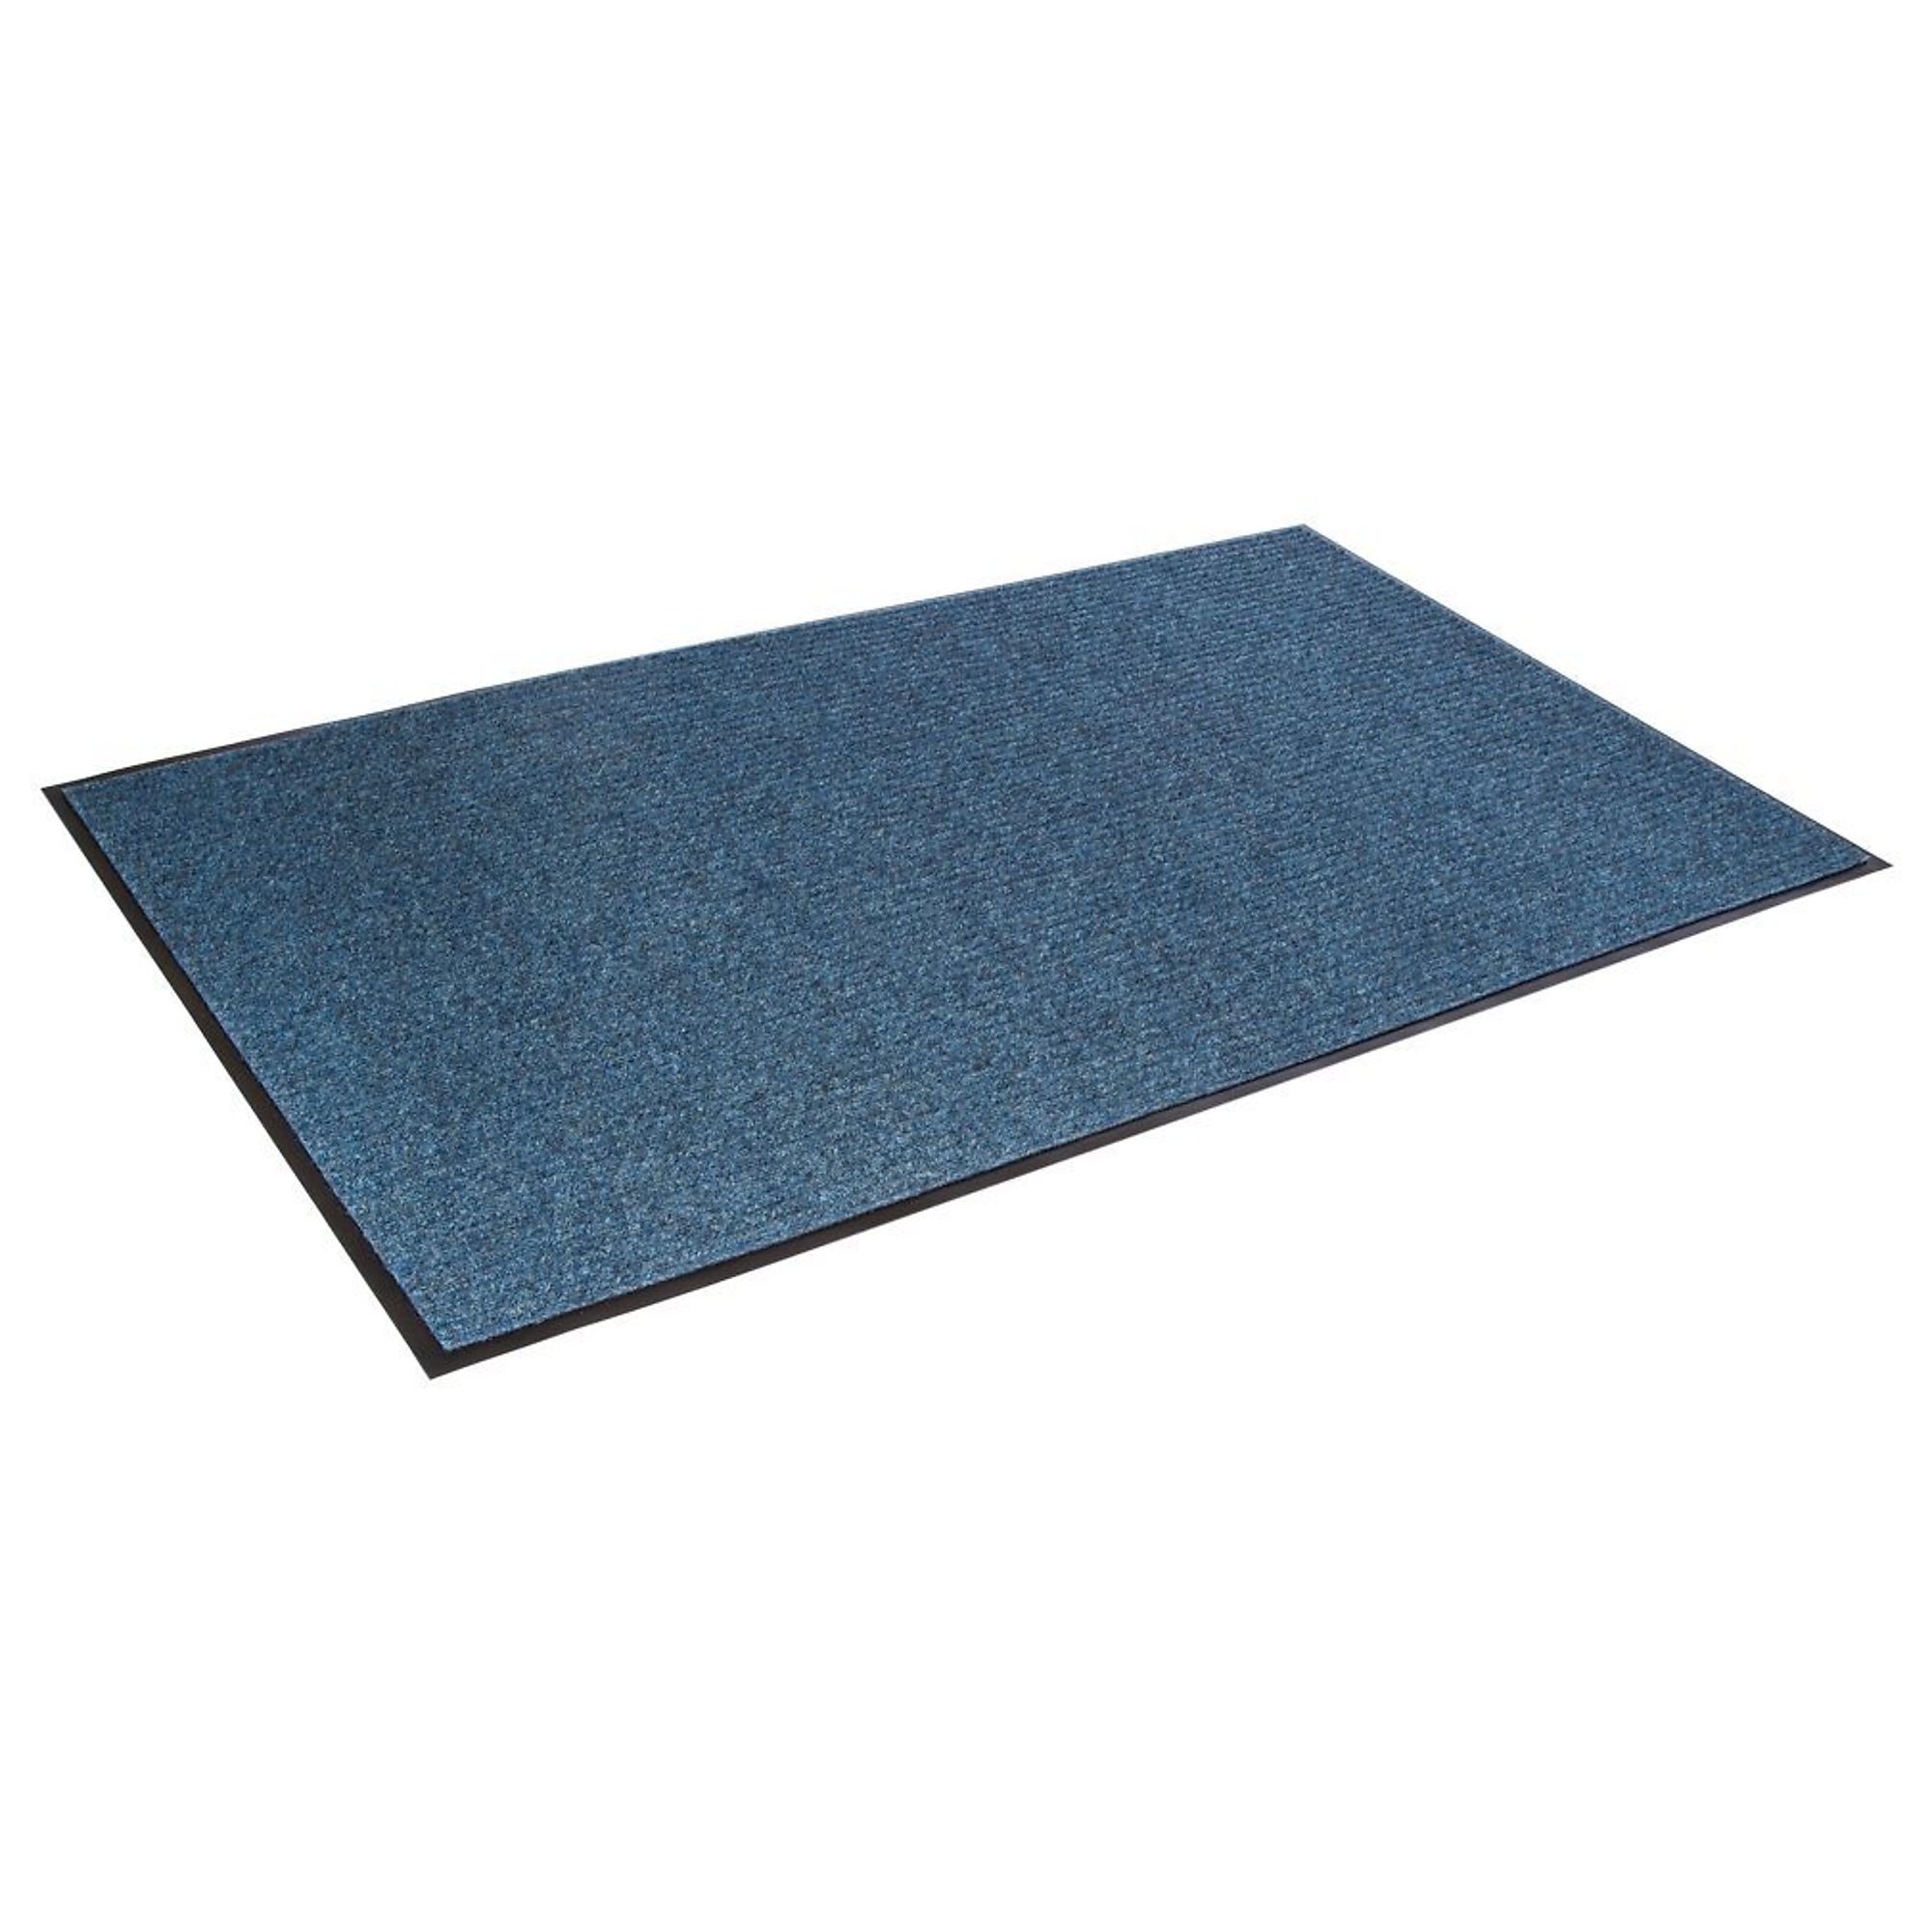 Crown Matting Technologies, Needle-Rib 3ft.x4ft. Blue, Width 36 in, Length 48 in, Thickness 5/16 in, Model NR 0034BL